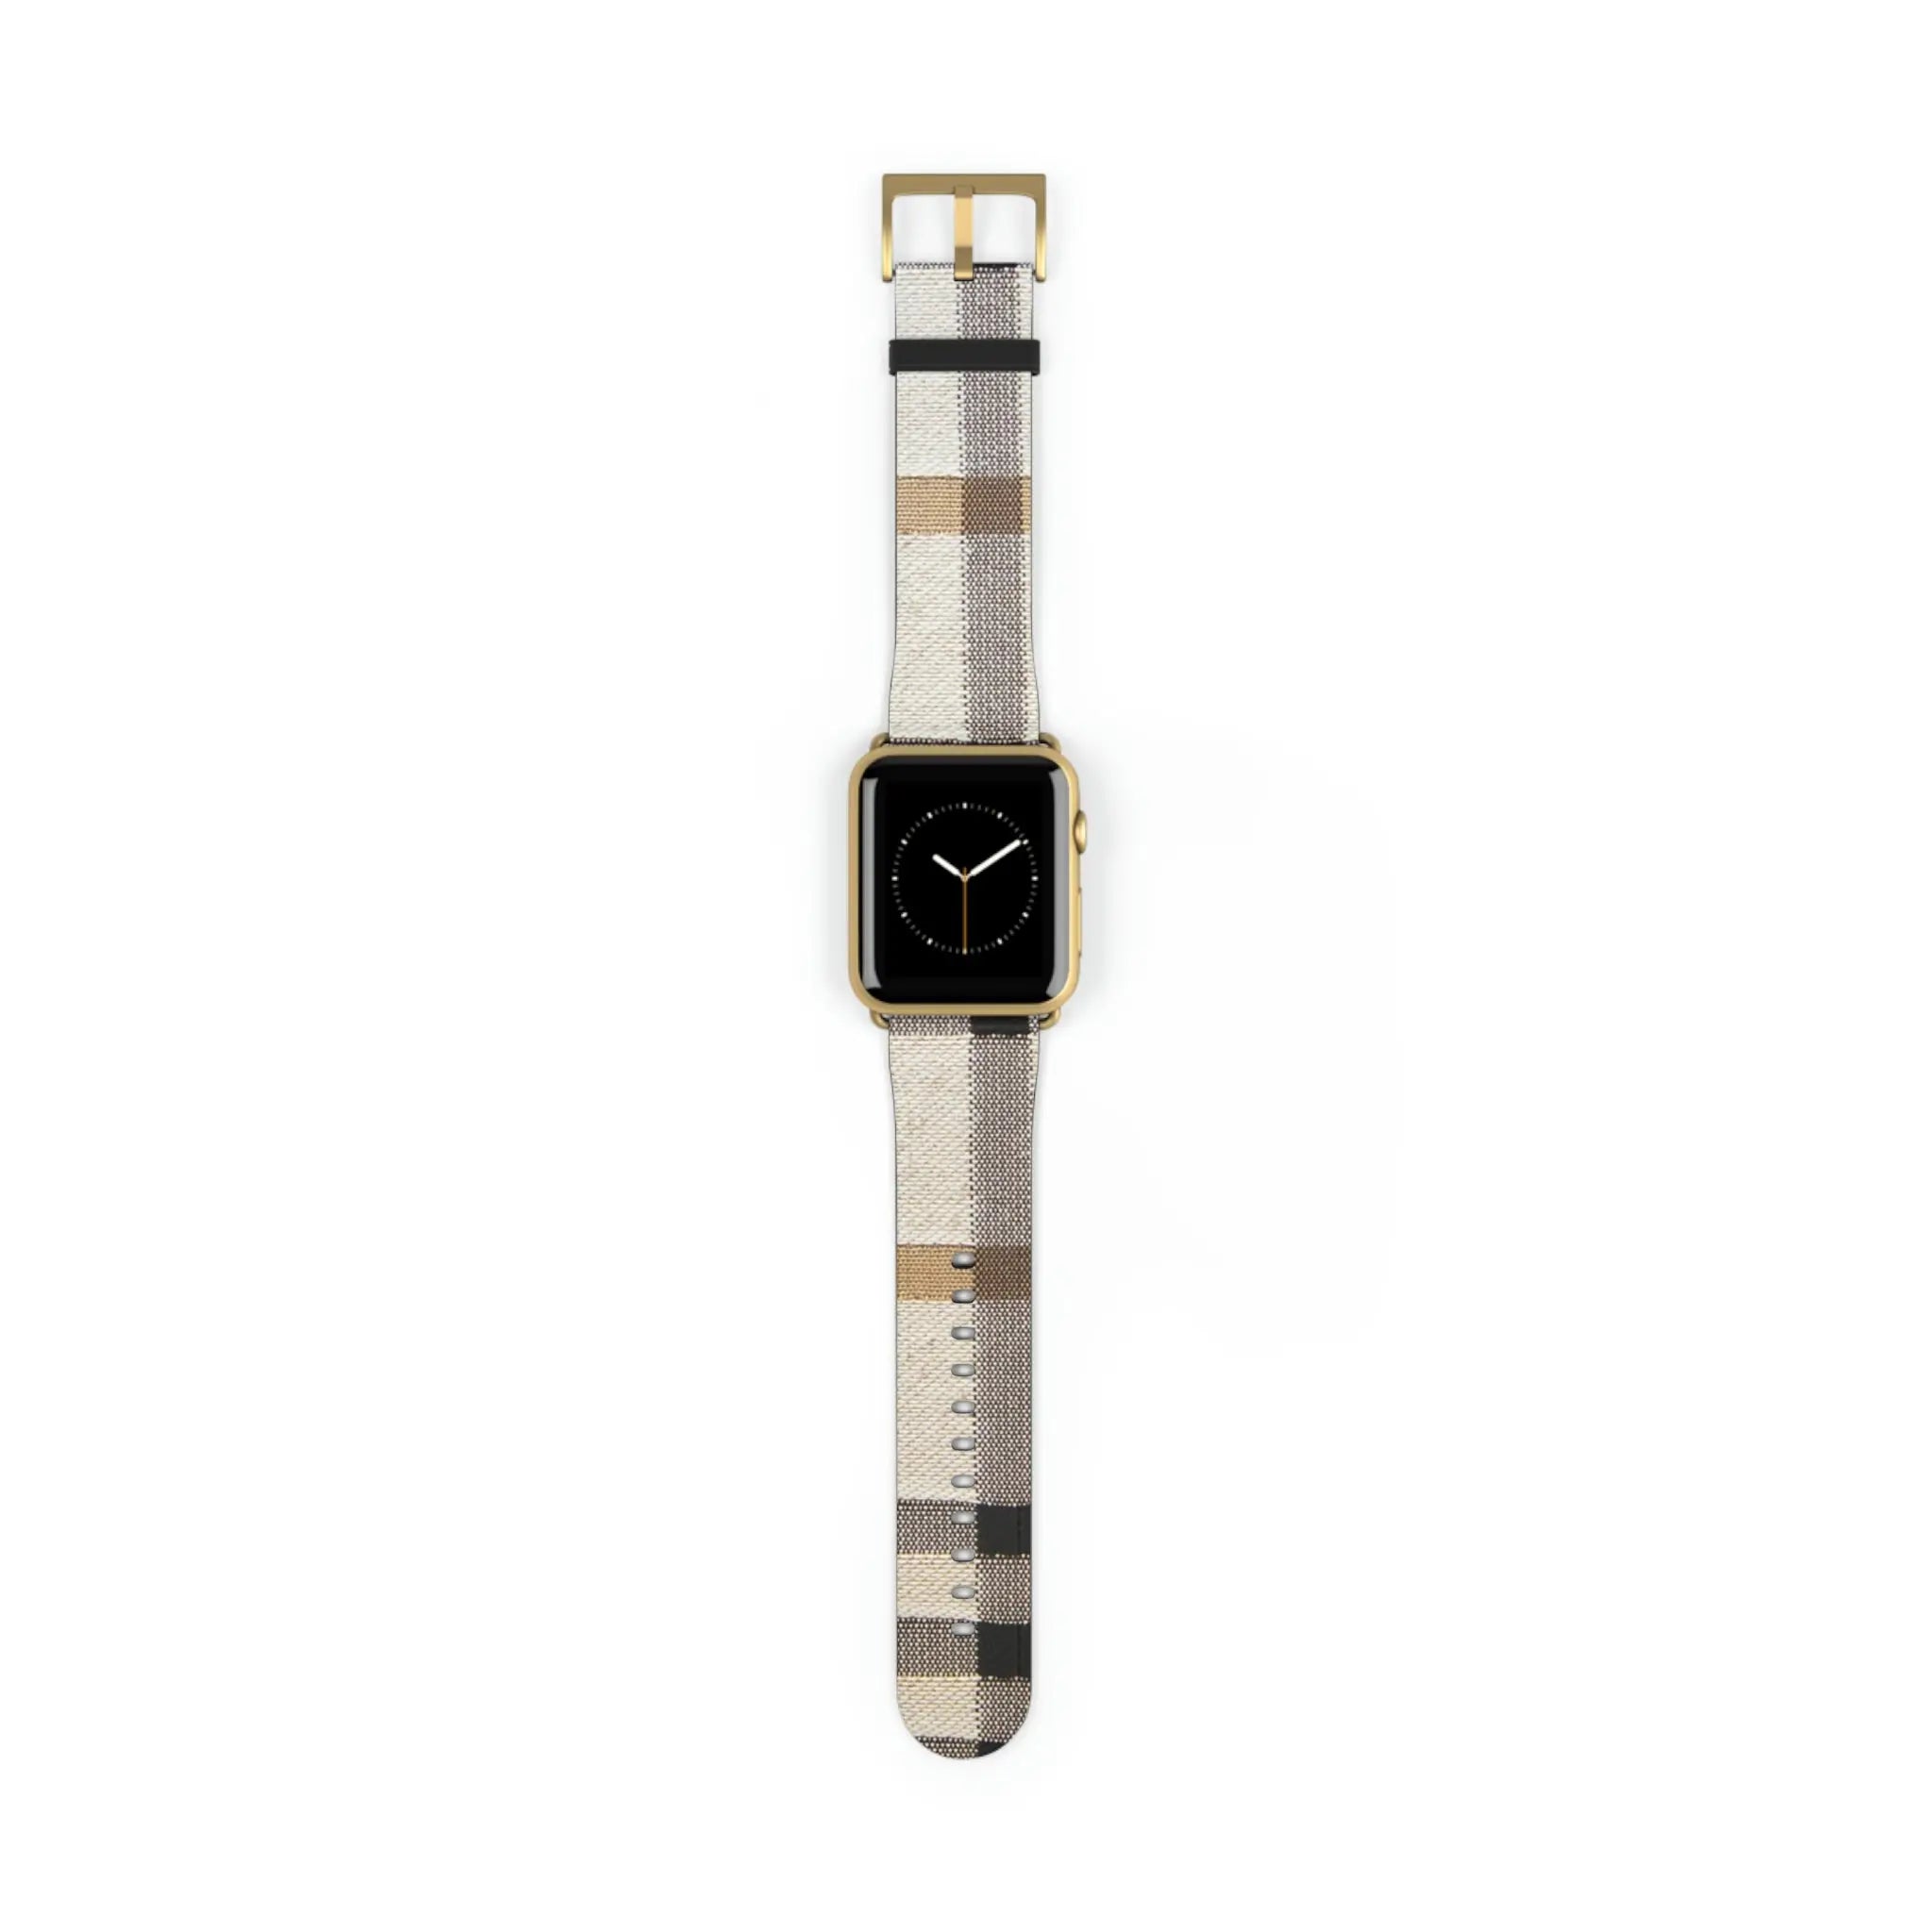  Designer Collection in Plaid (Beige) Watch Band for Apple Watch Watch Bands42-45mmGoldMatte